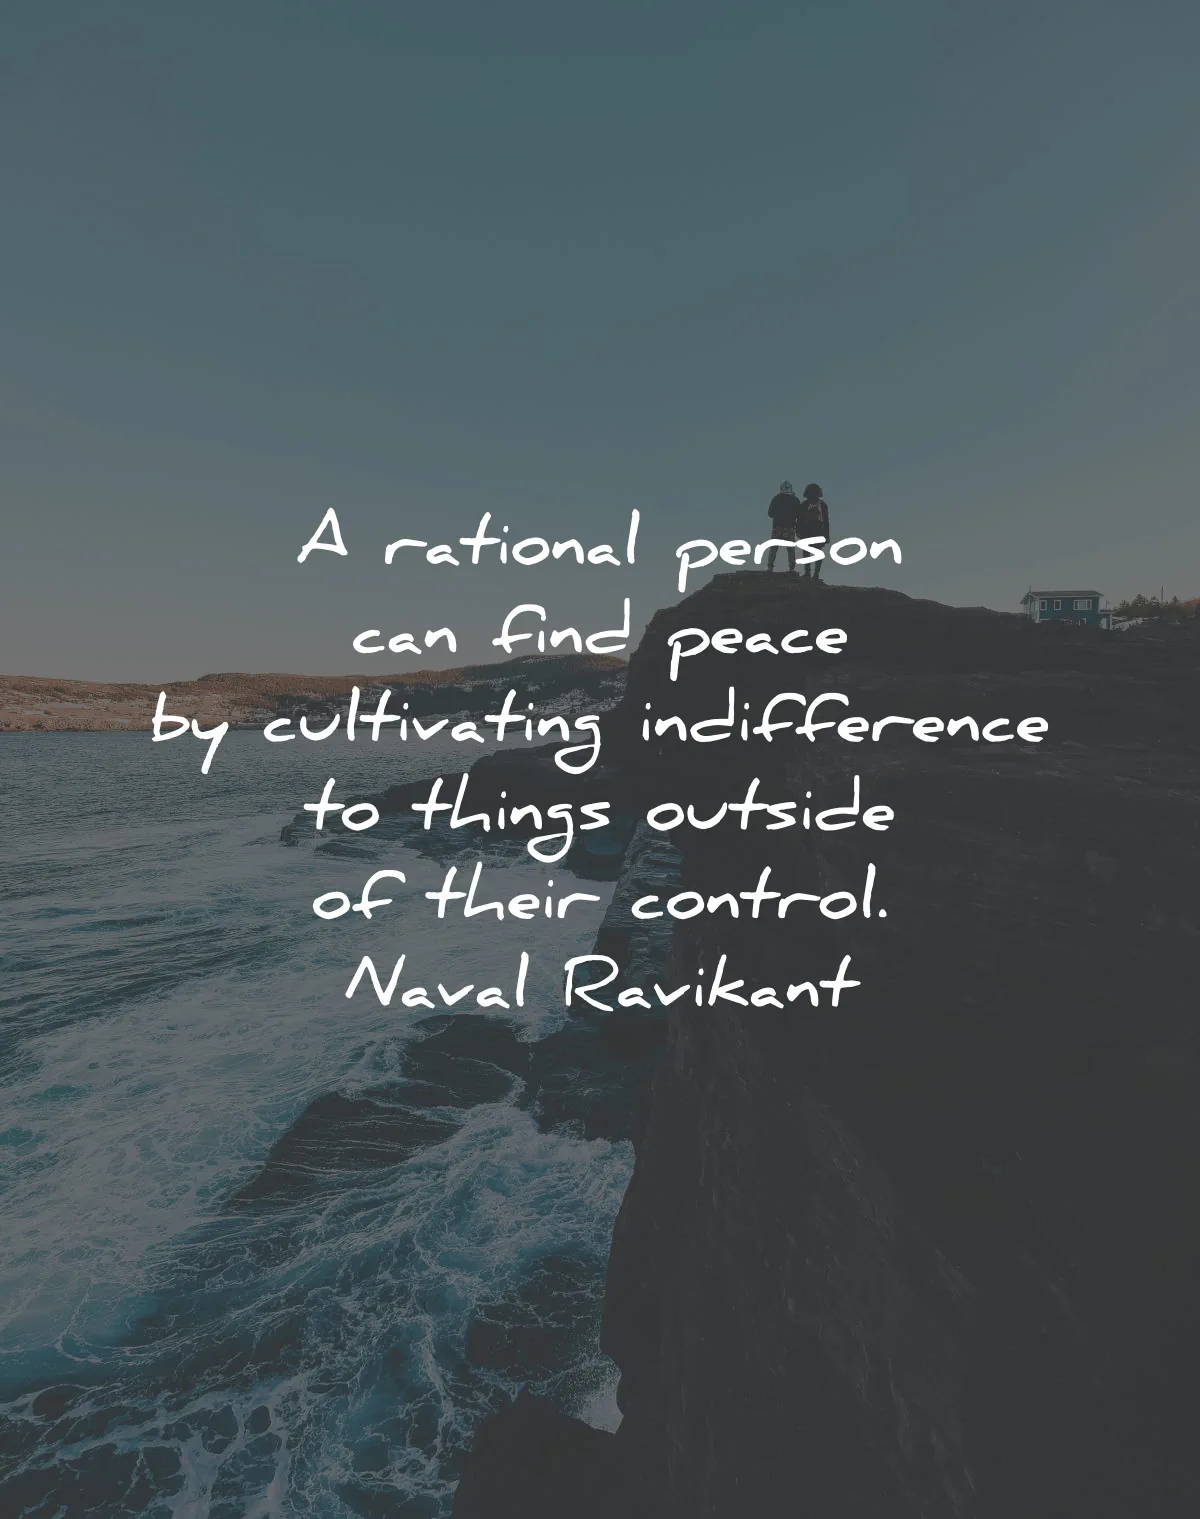 inner peace quotes rational person find cultivating indifference outside control naval ravikant wisdom